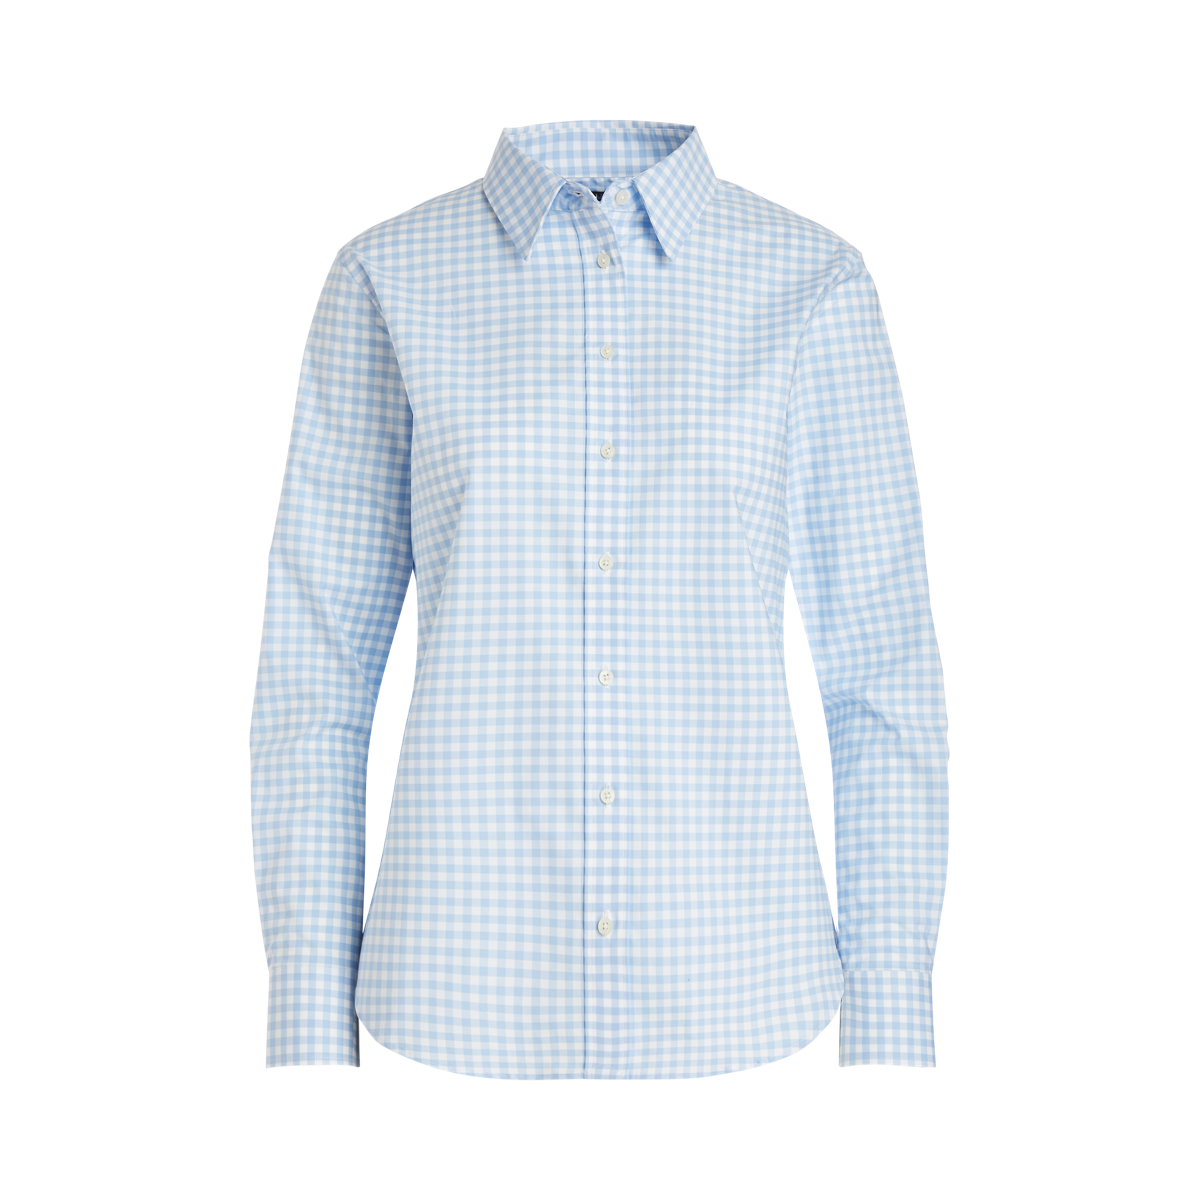 Easy Care Gingham Cotton Shirt